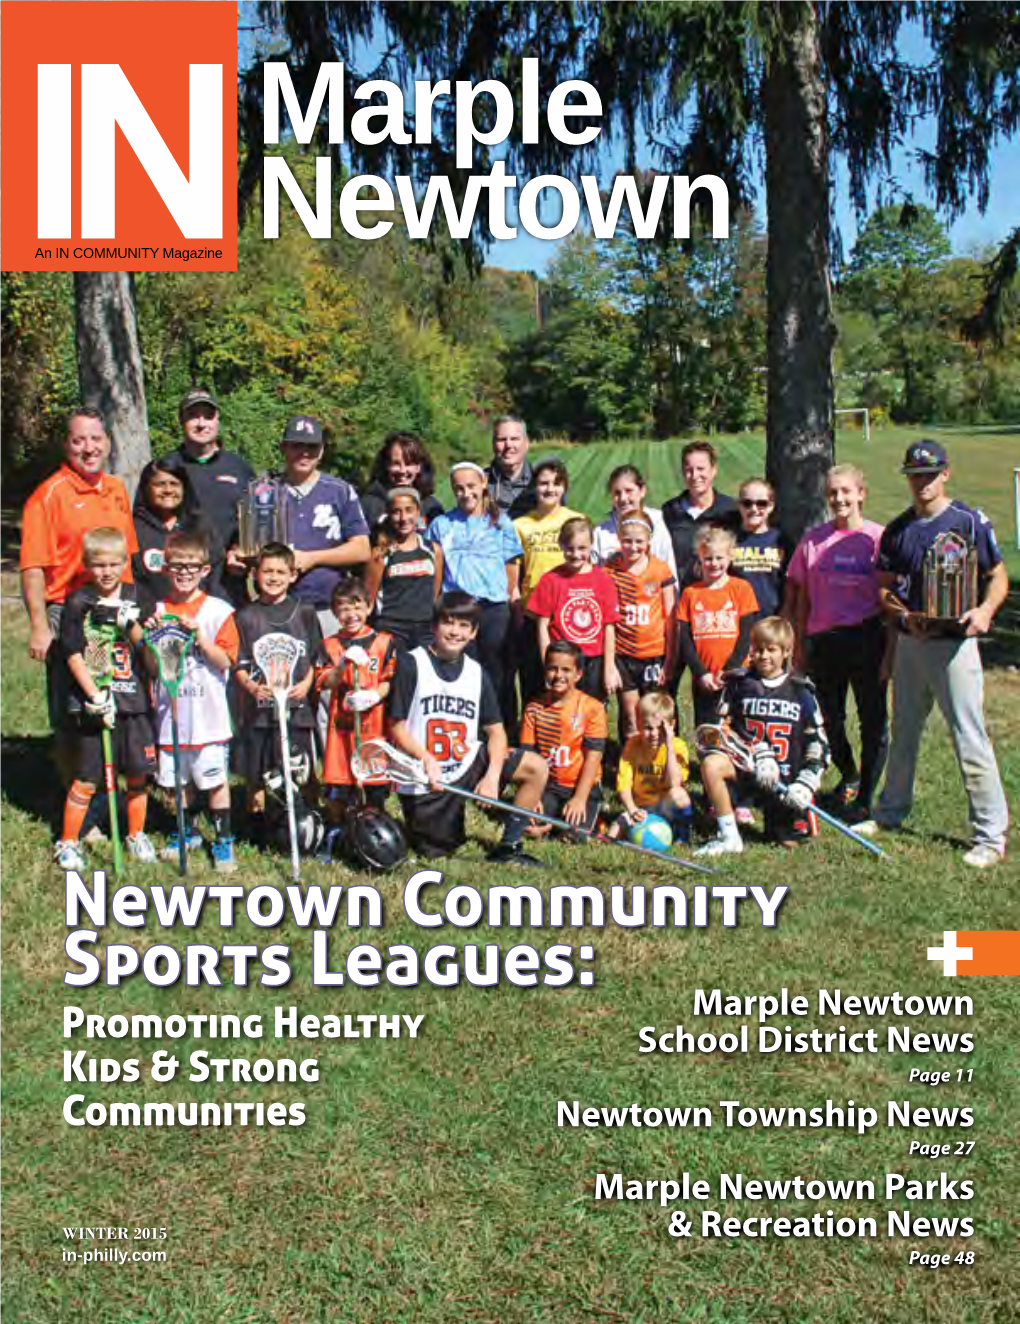 Marple Newtown School District News Page 11 Newtown Township News Page 27 Marple Newtown Parks WINTER 2015 & Recreation News In-Philly.Com Page 48